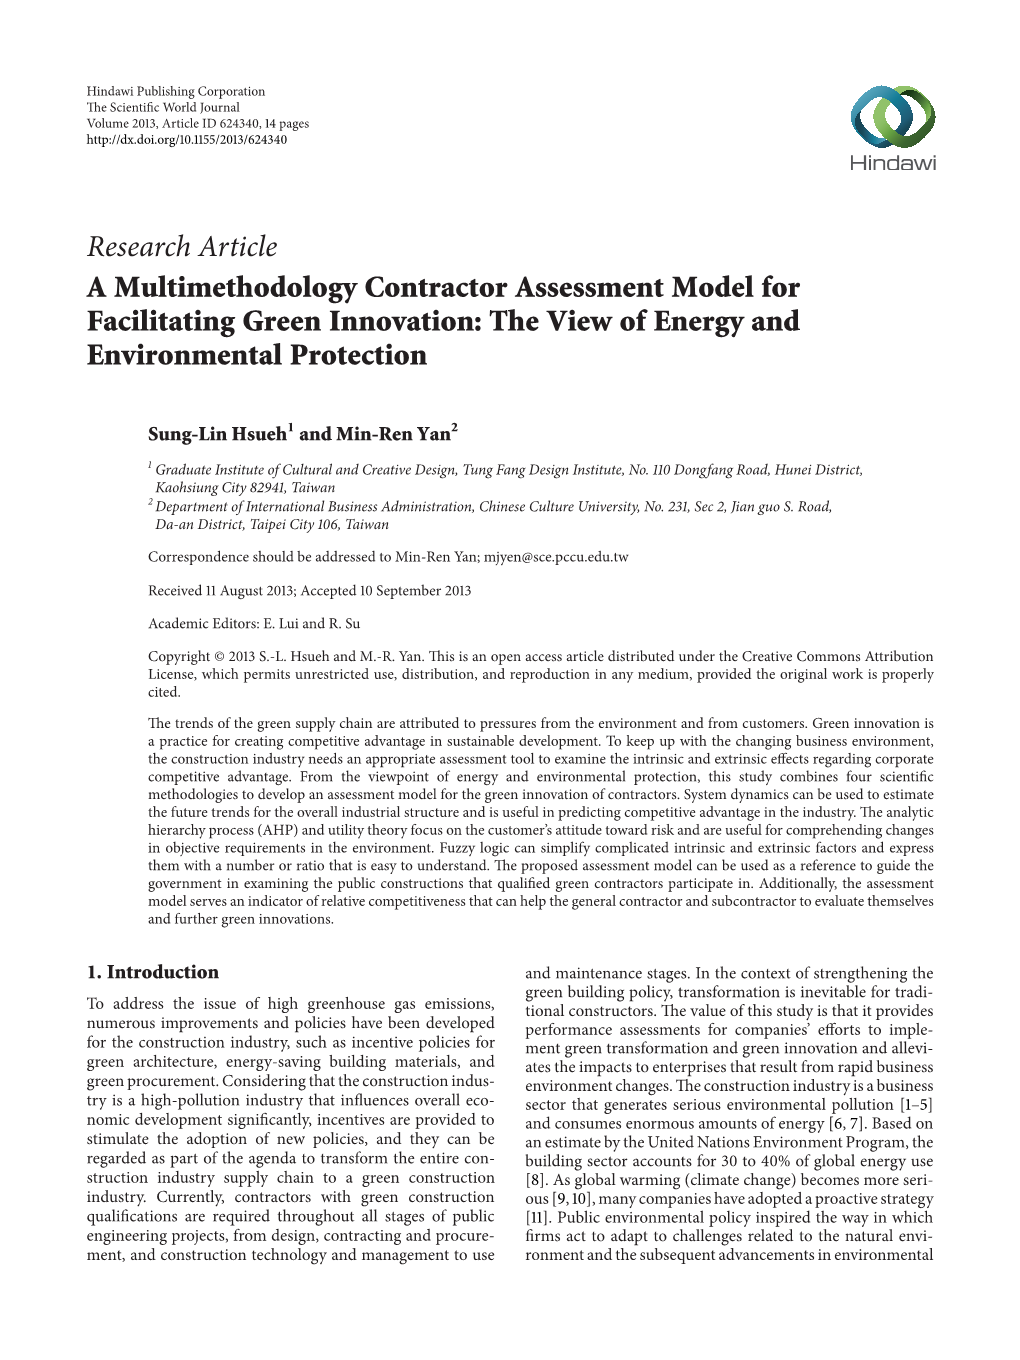 A Multimethodology Contractor Assessment Model for Facilitating Green Innovation: the View of Energy and Environmental Protection